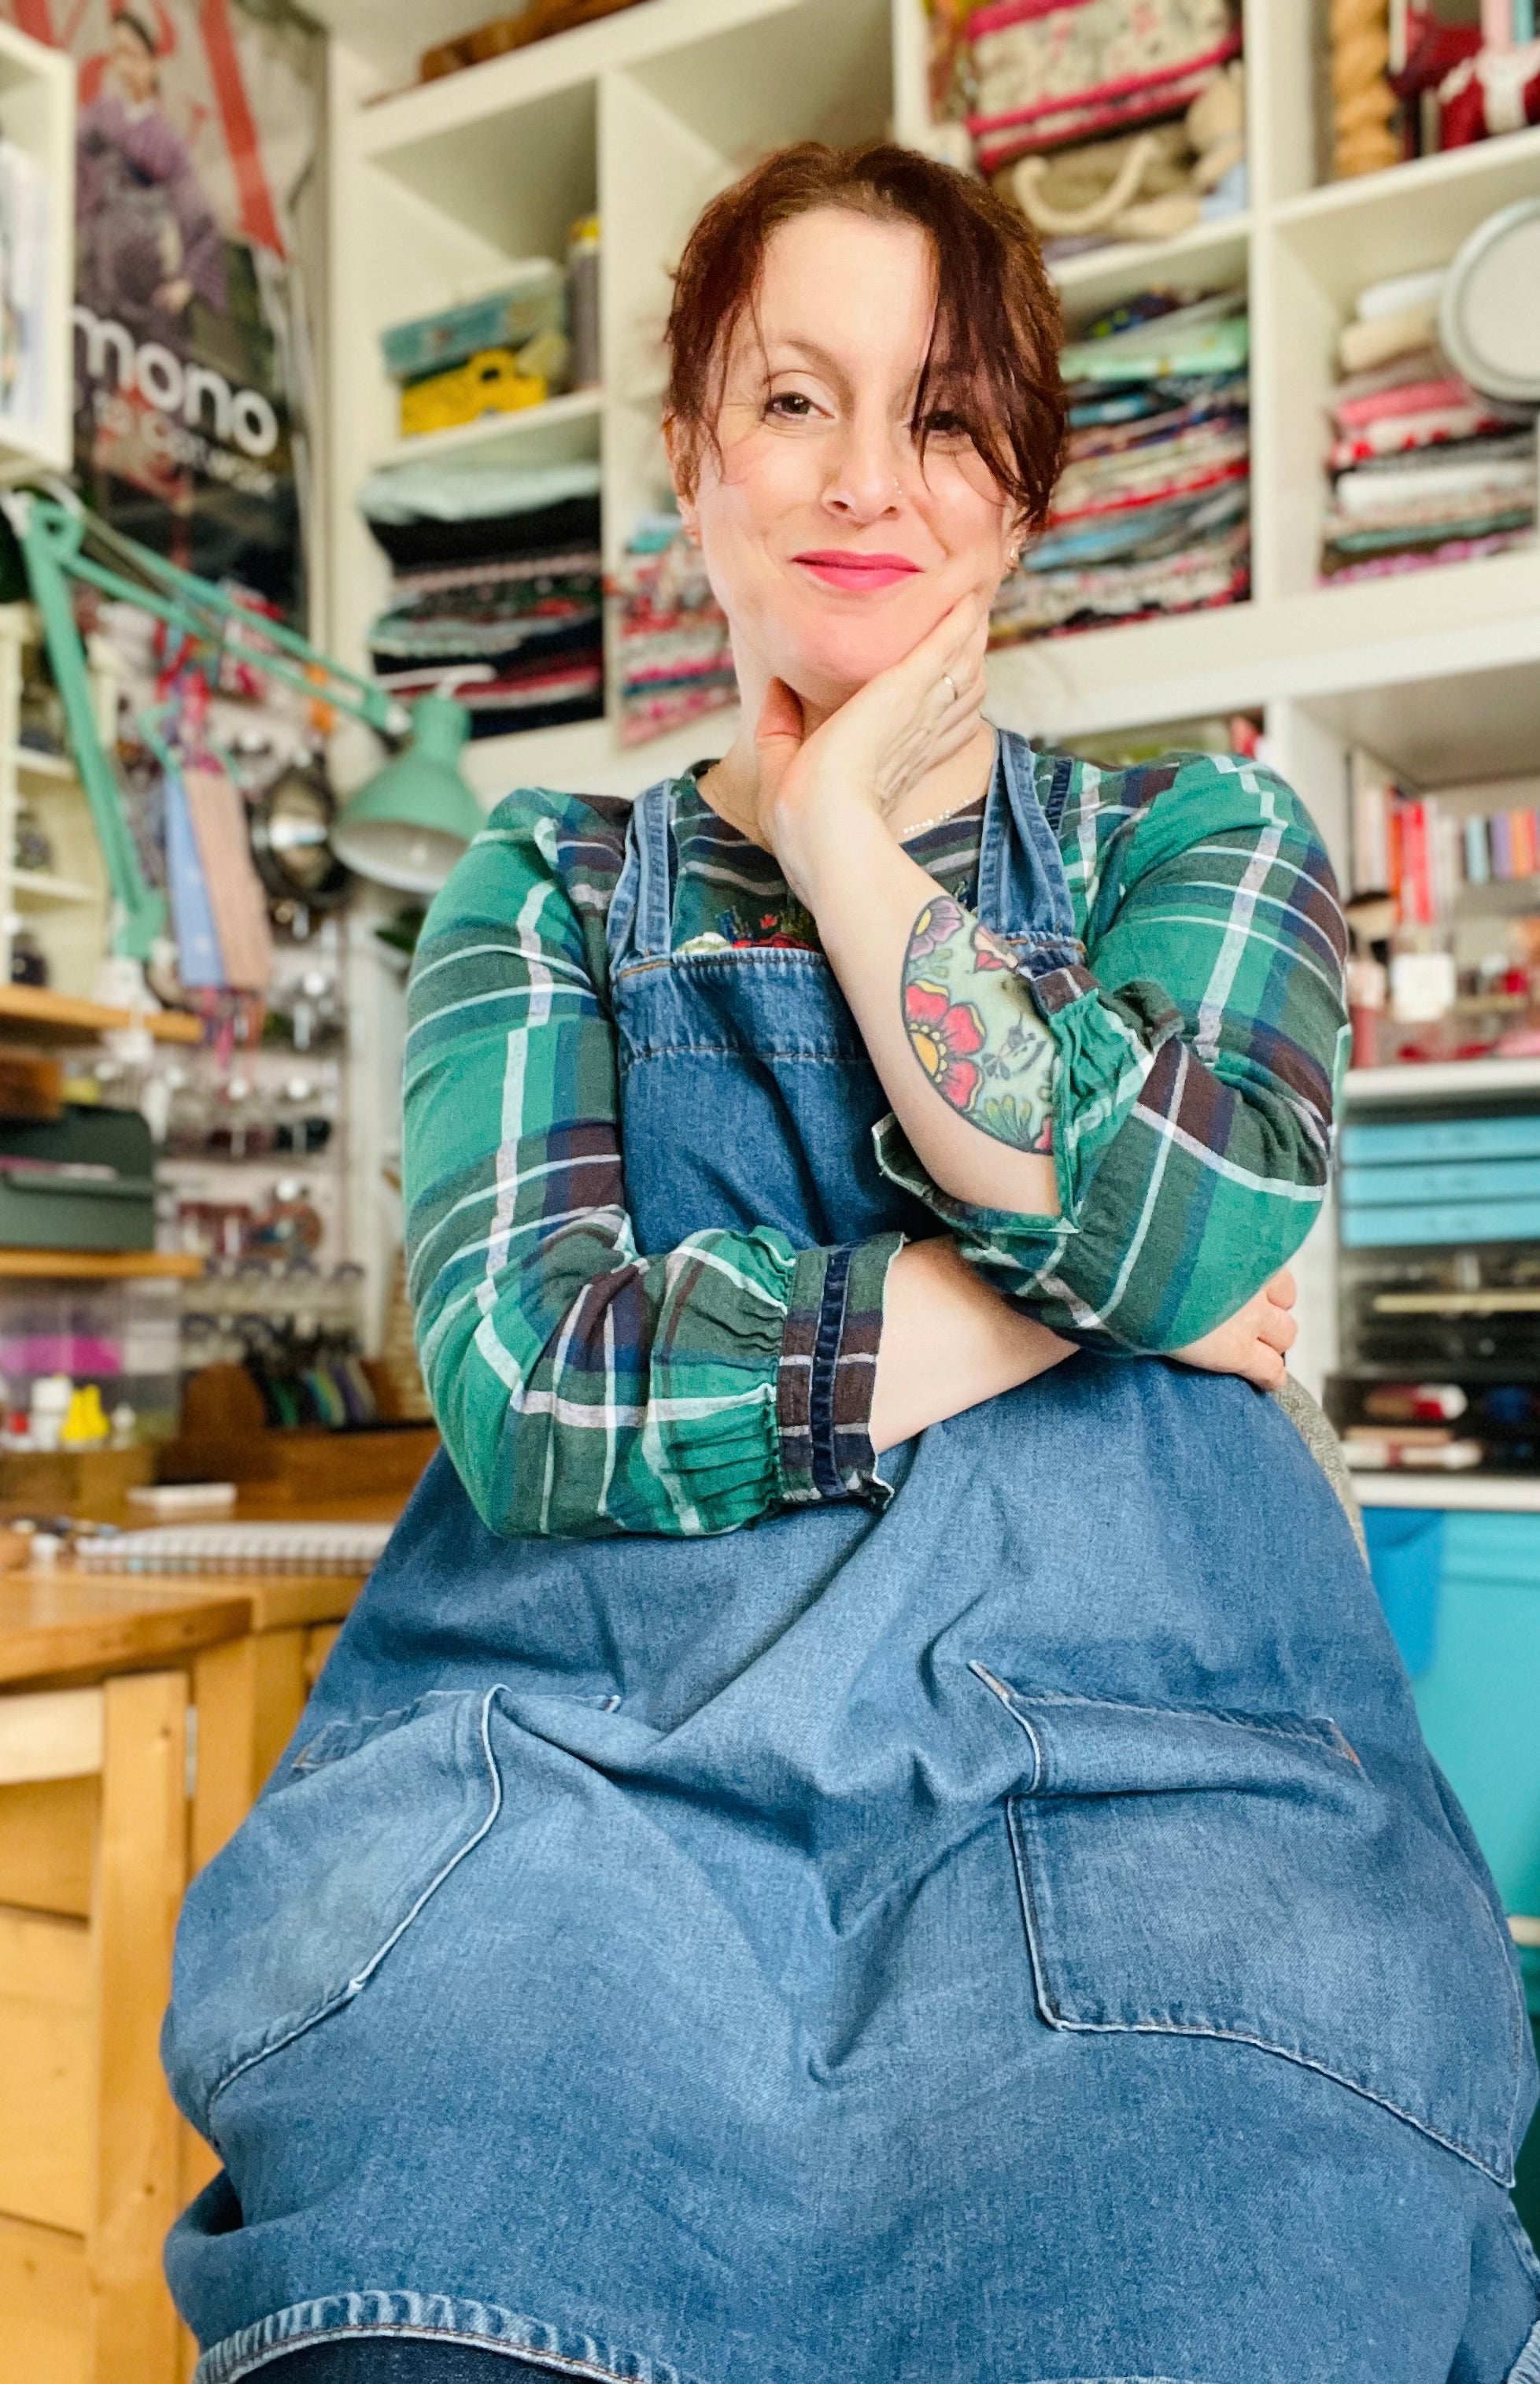 tabs tebay, maker and founder of the rosyretro knitting and crochet shop in the uk